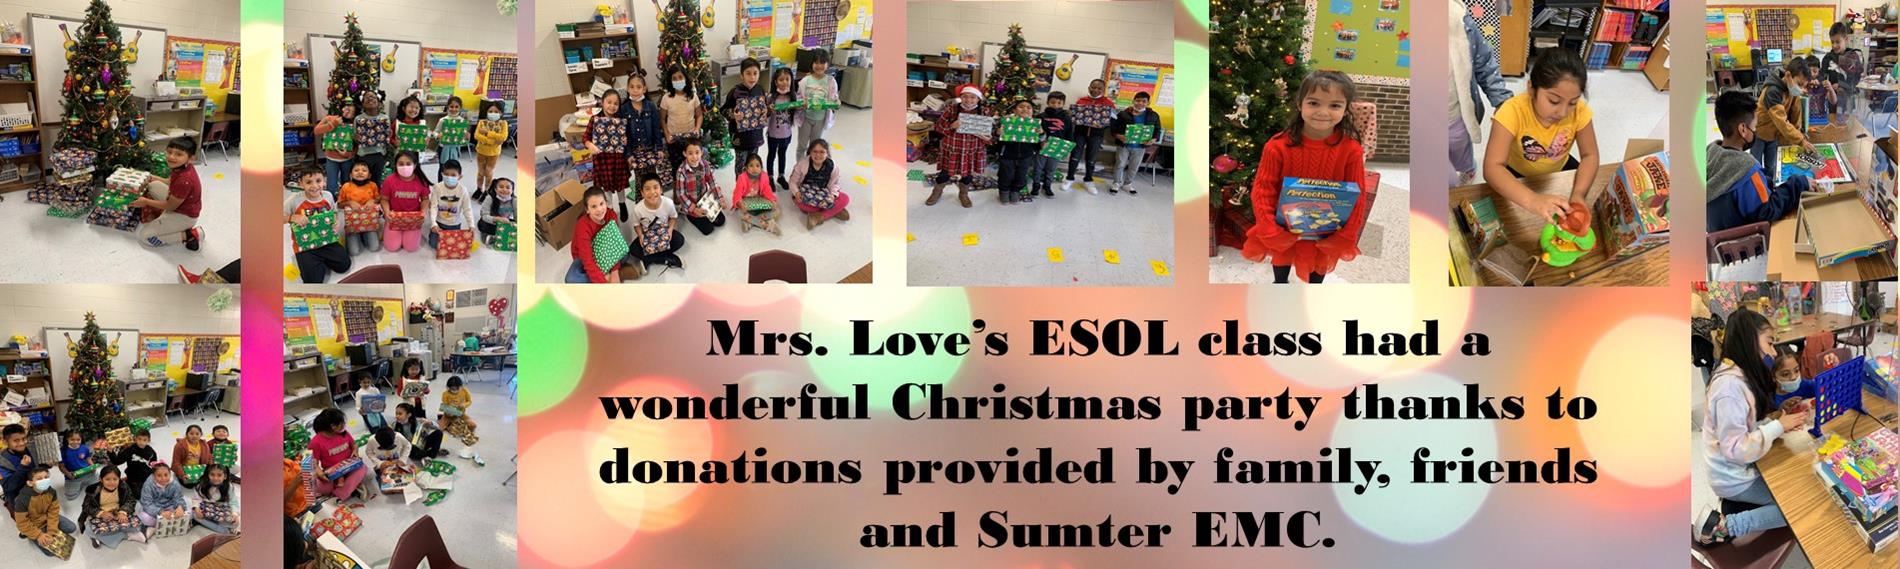 ESOL Christmas Party 